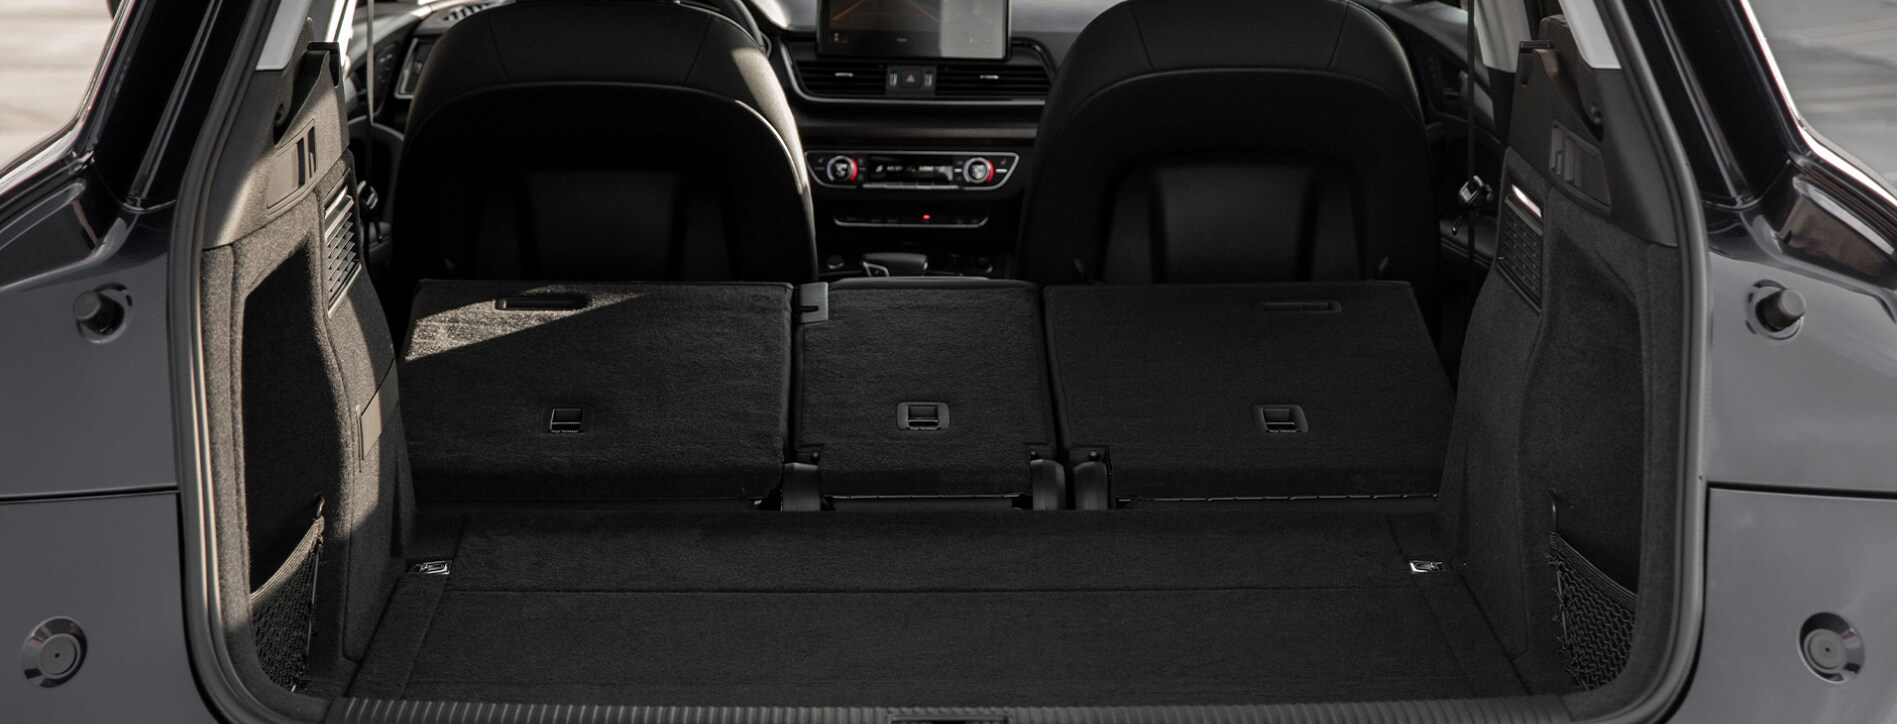 A view of the open hatch and rear cargo space of the 2023 Audi Q5